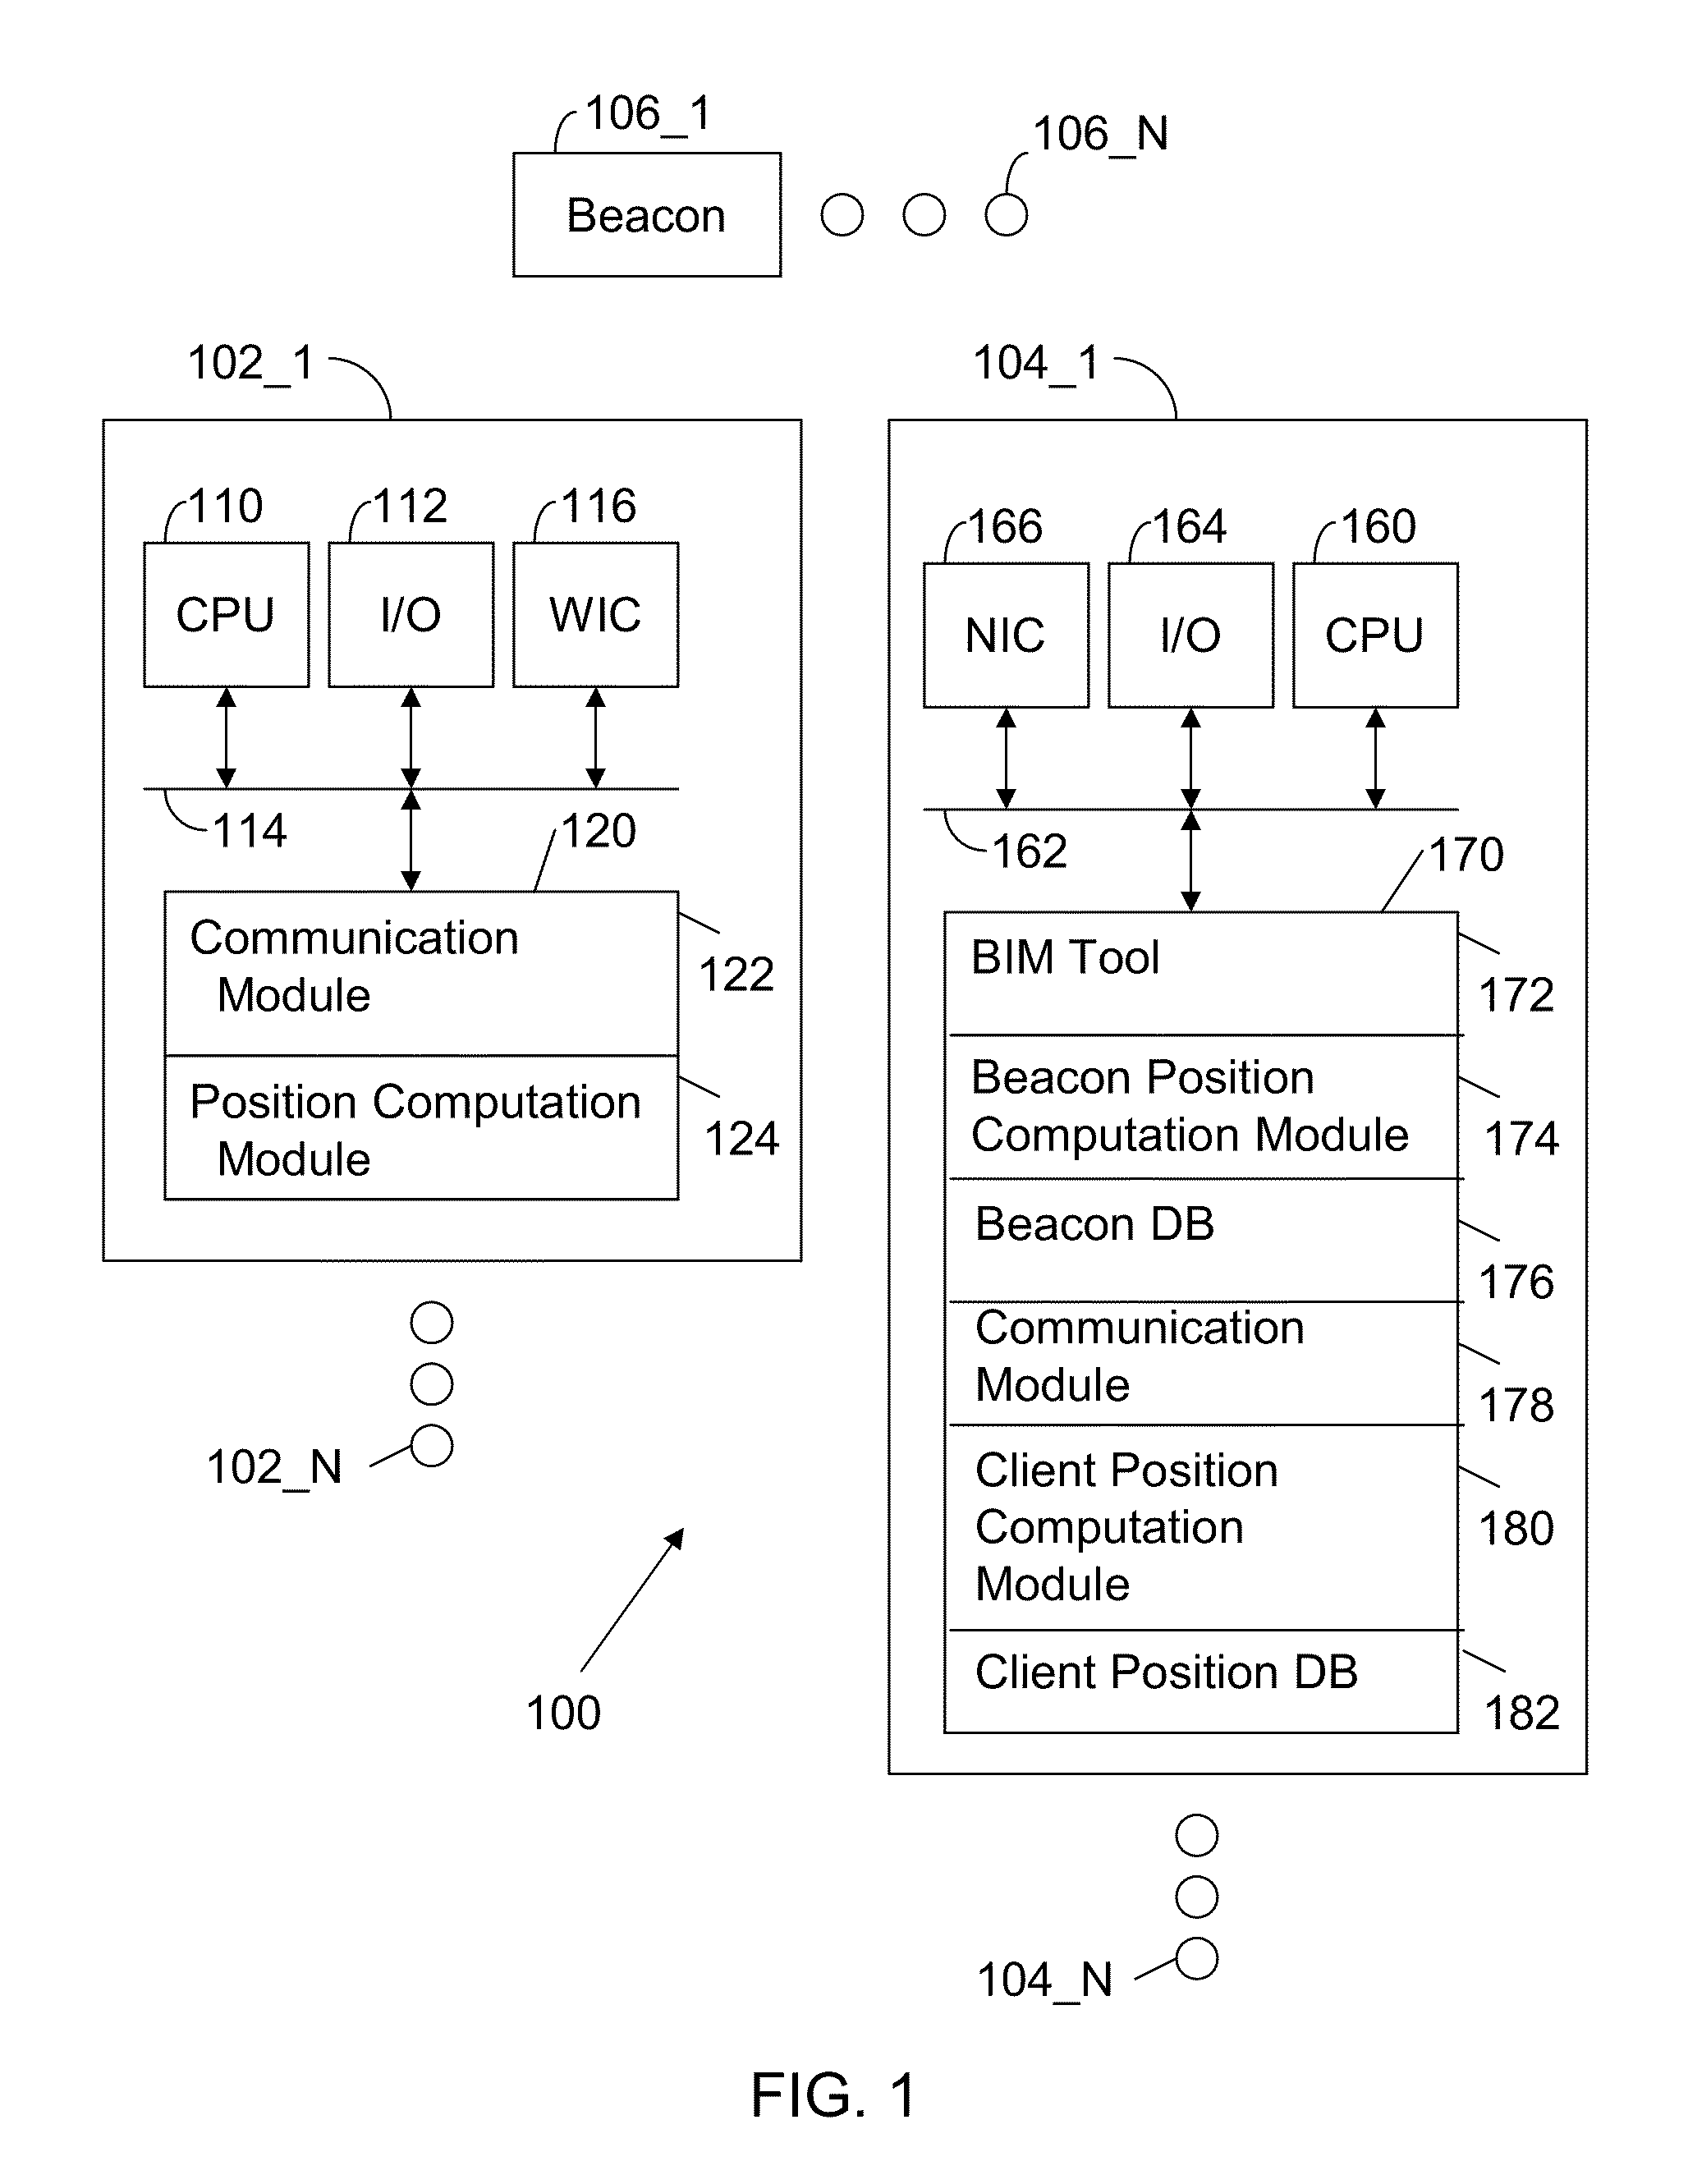 Apparatus and Method for Constructing and Utilizing a Beacon Location Database